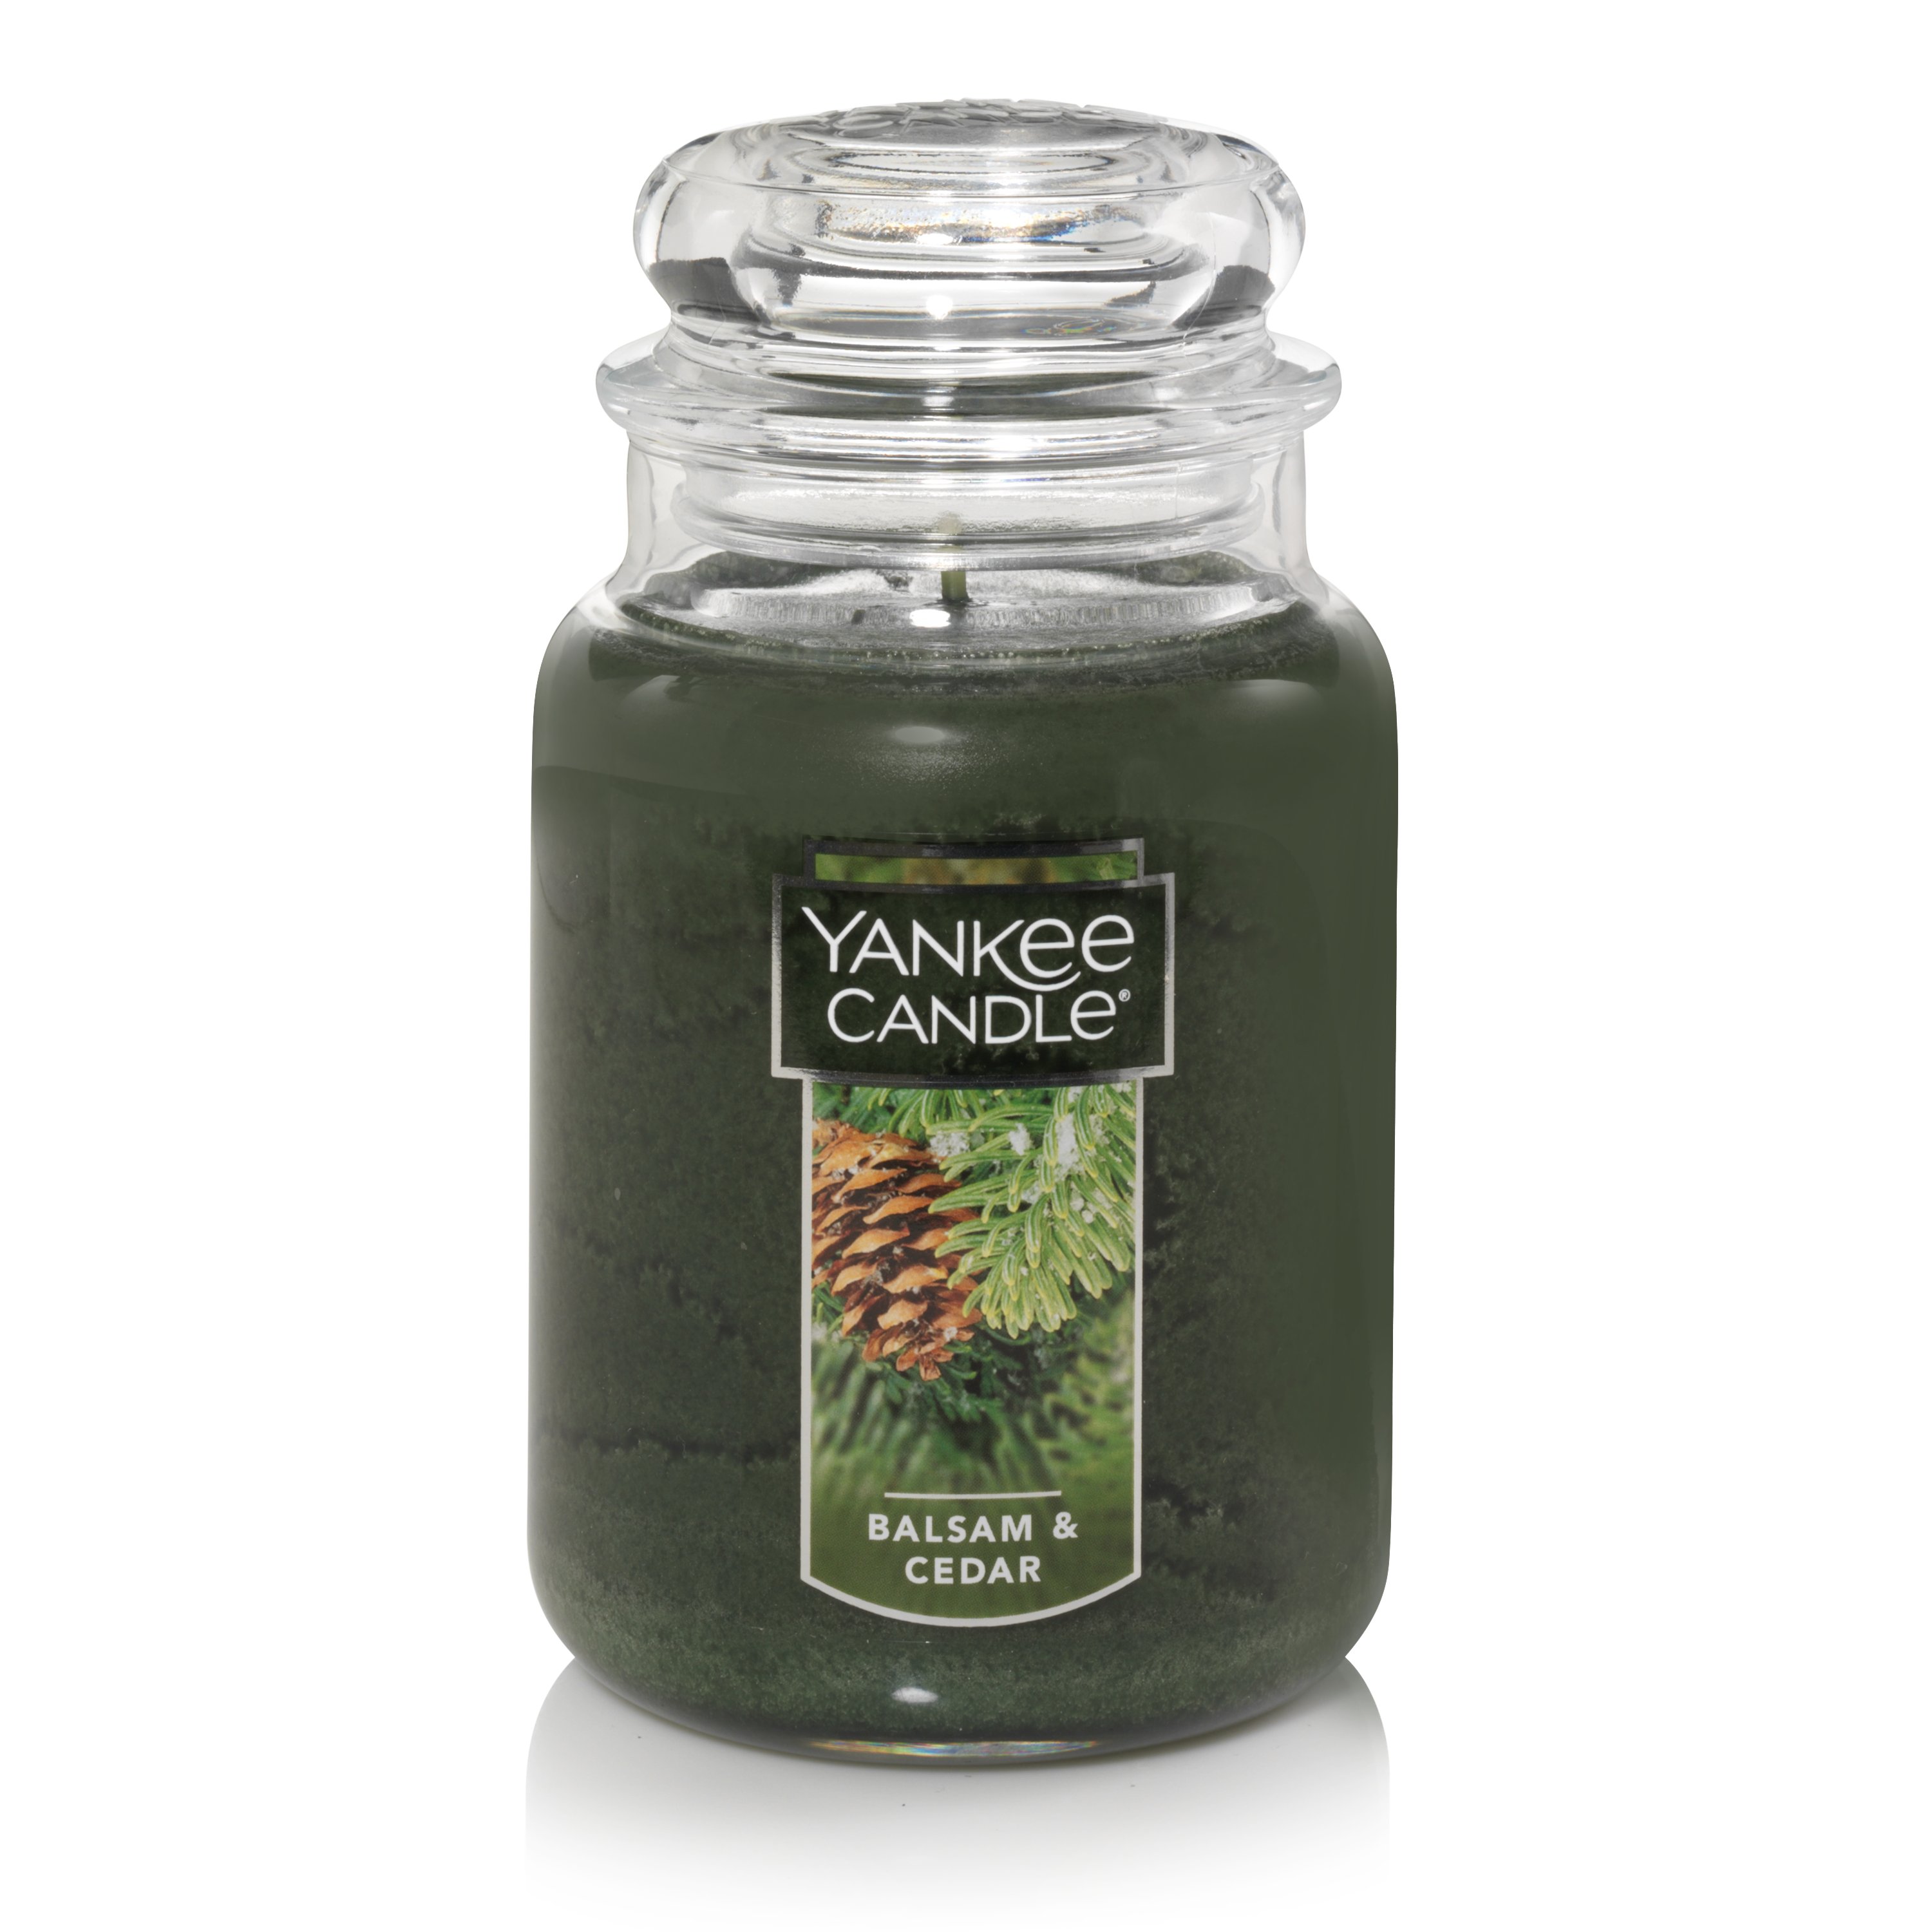 1 Yankee Candle SWEET NOTHINGS Large 1-Wick Classic Jar Candle 22 oz 